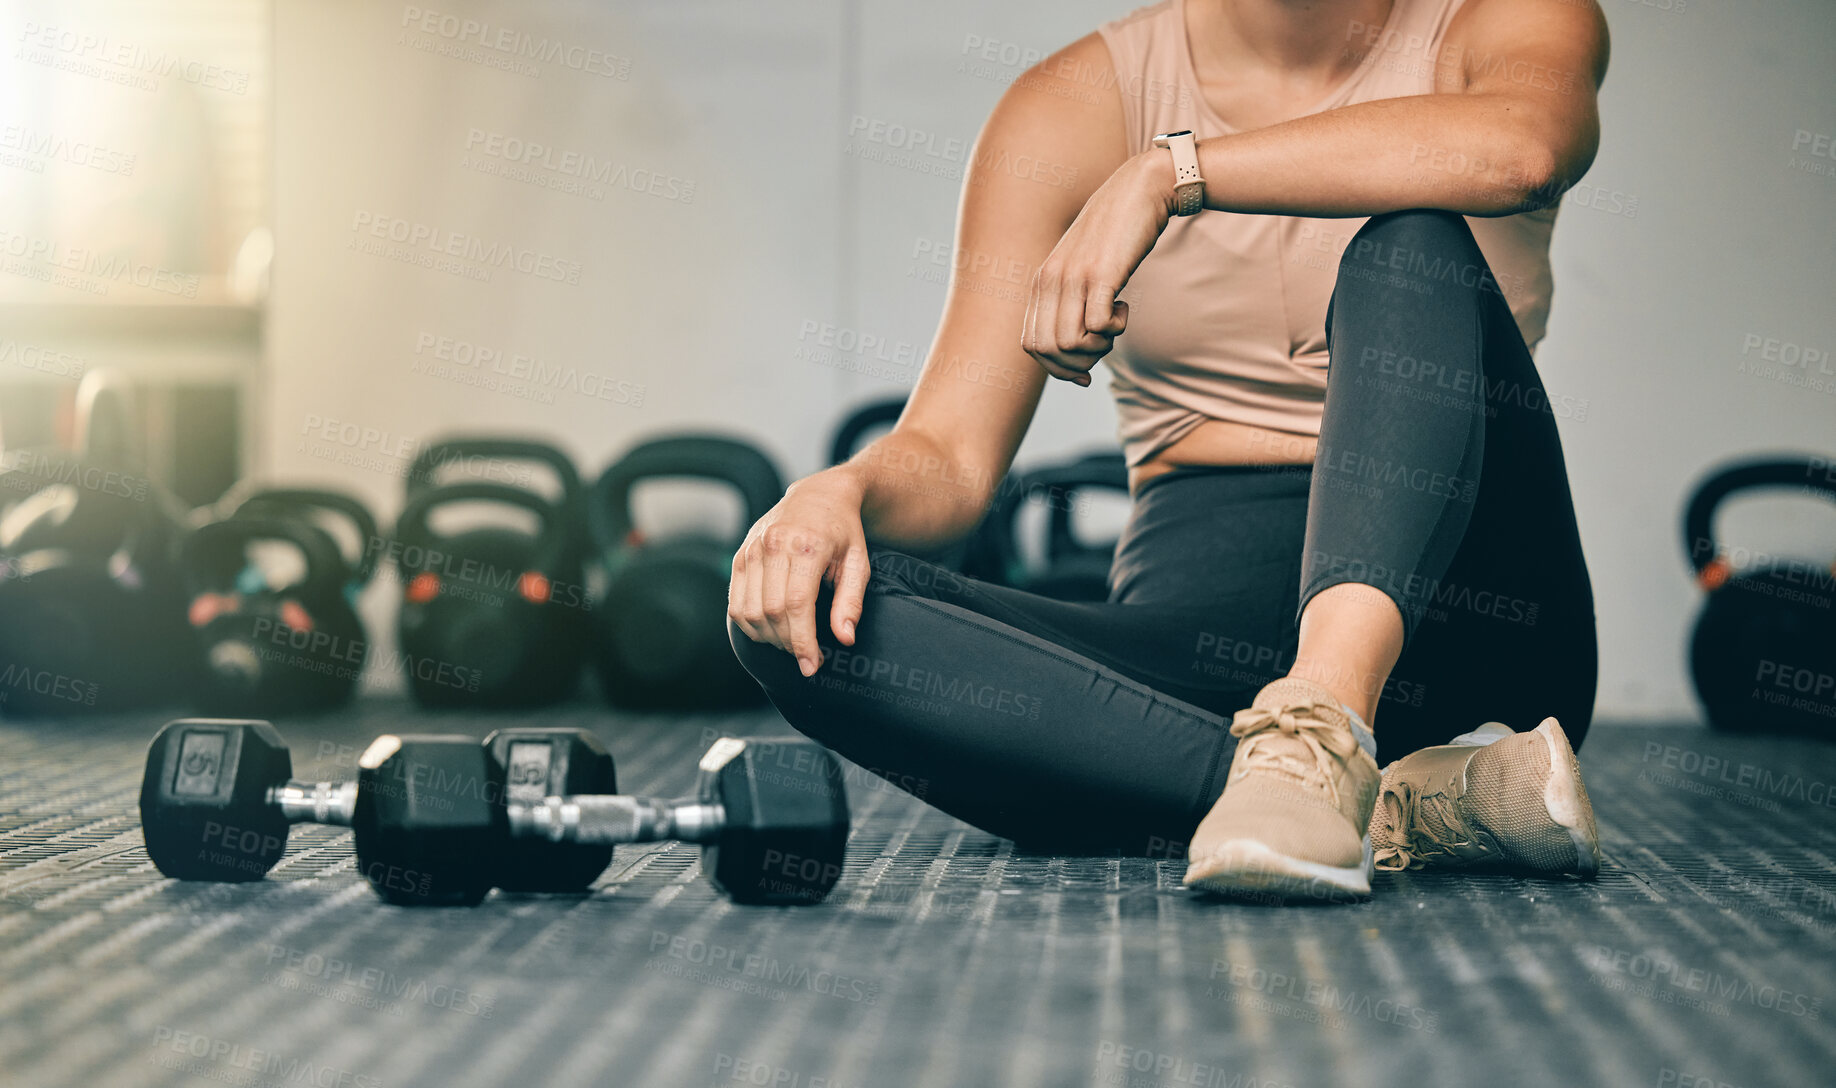 Buy stock photo Dumbbells, gym and woman on a health studio club floor ready for training and exercise. Strength challenge, healthy athlete and power workout of an athlete on the ground rest after lifting weights